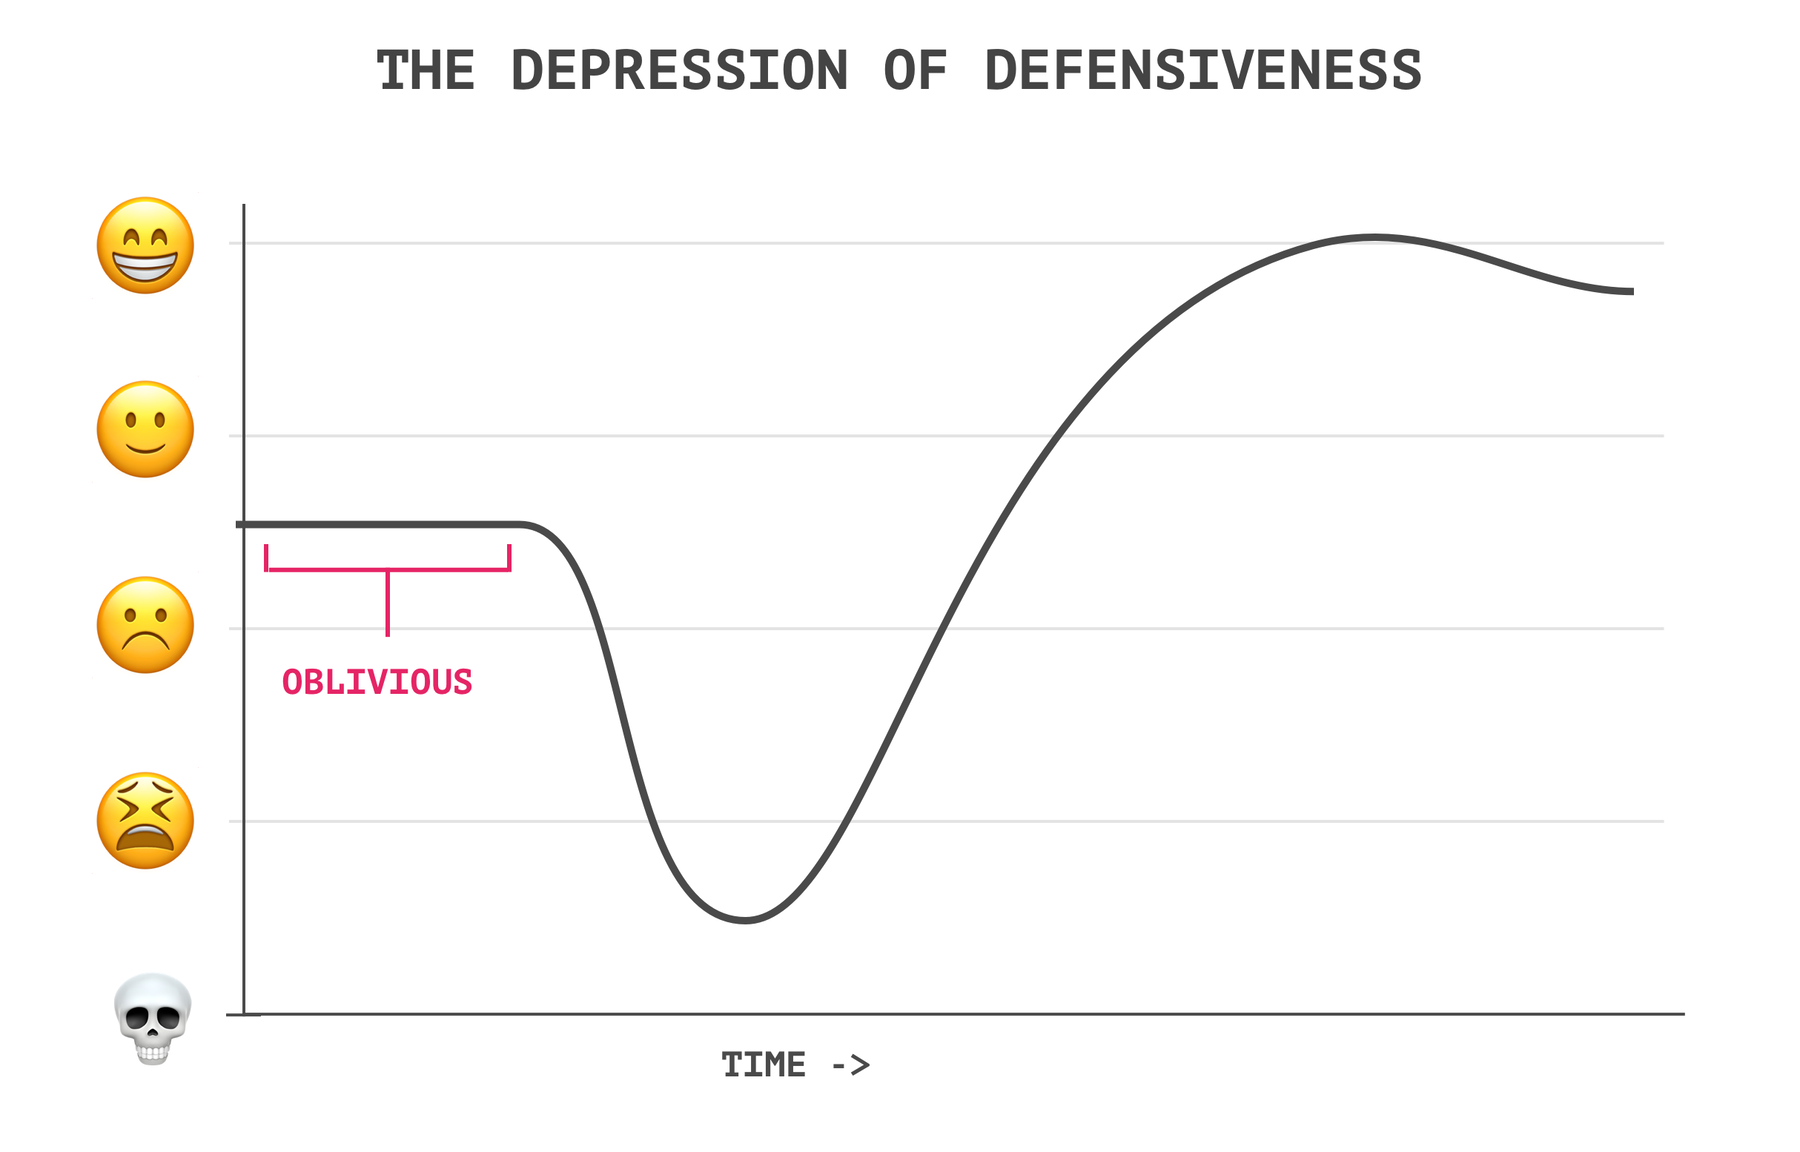 THE DEPRESSION OF DEFENSIVENESS chart with initial portion labelled “Oblivious”